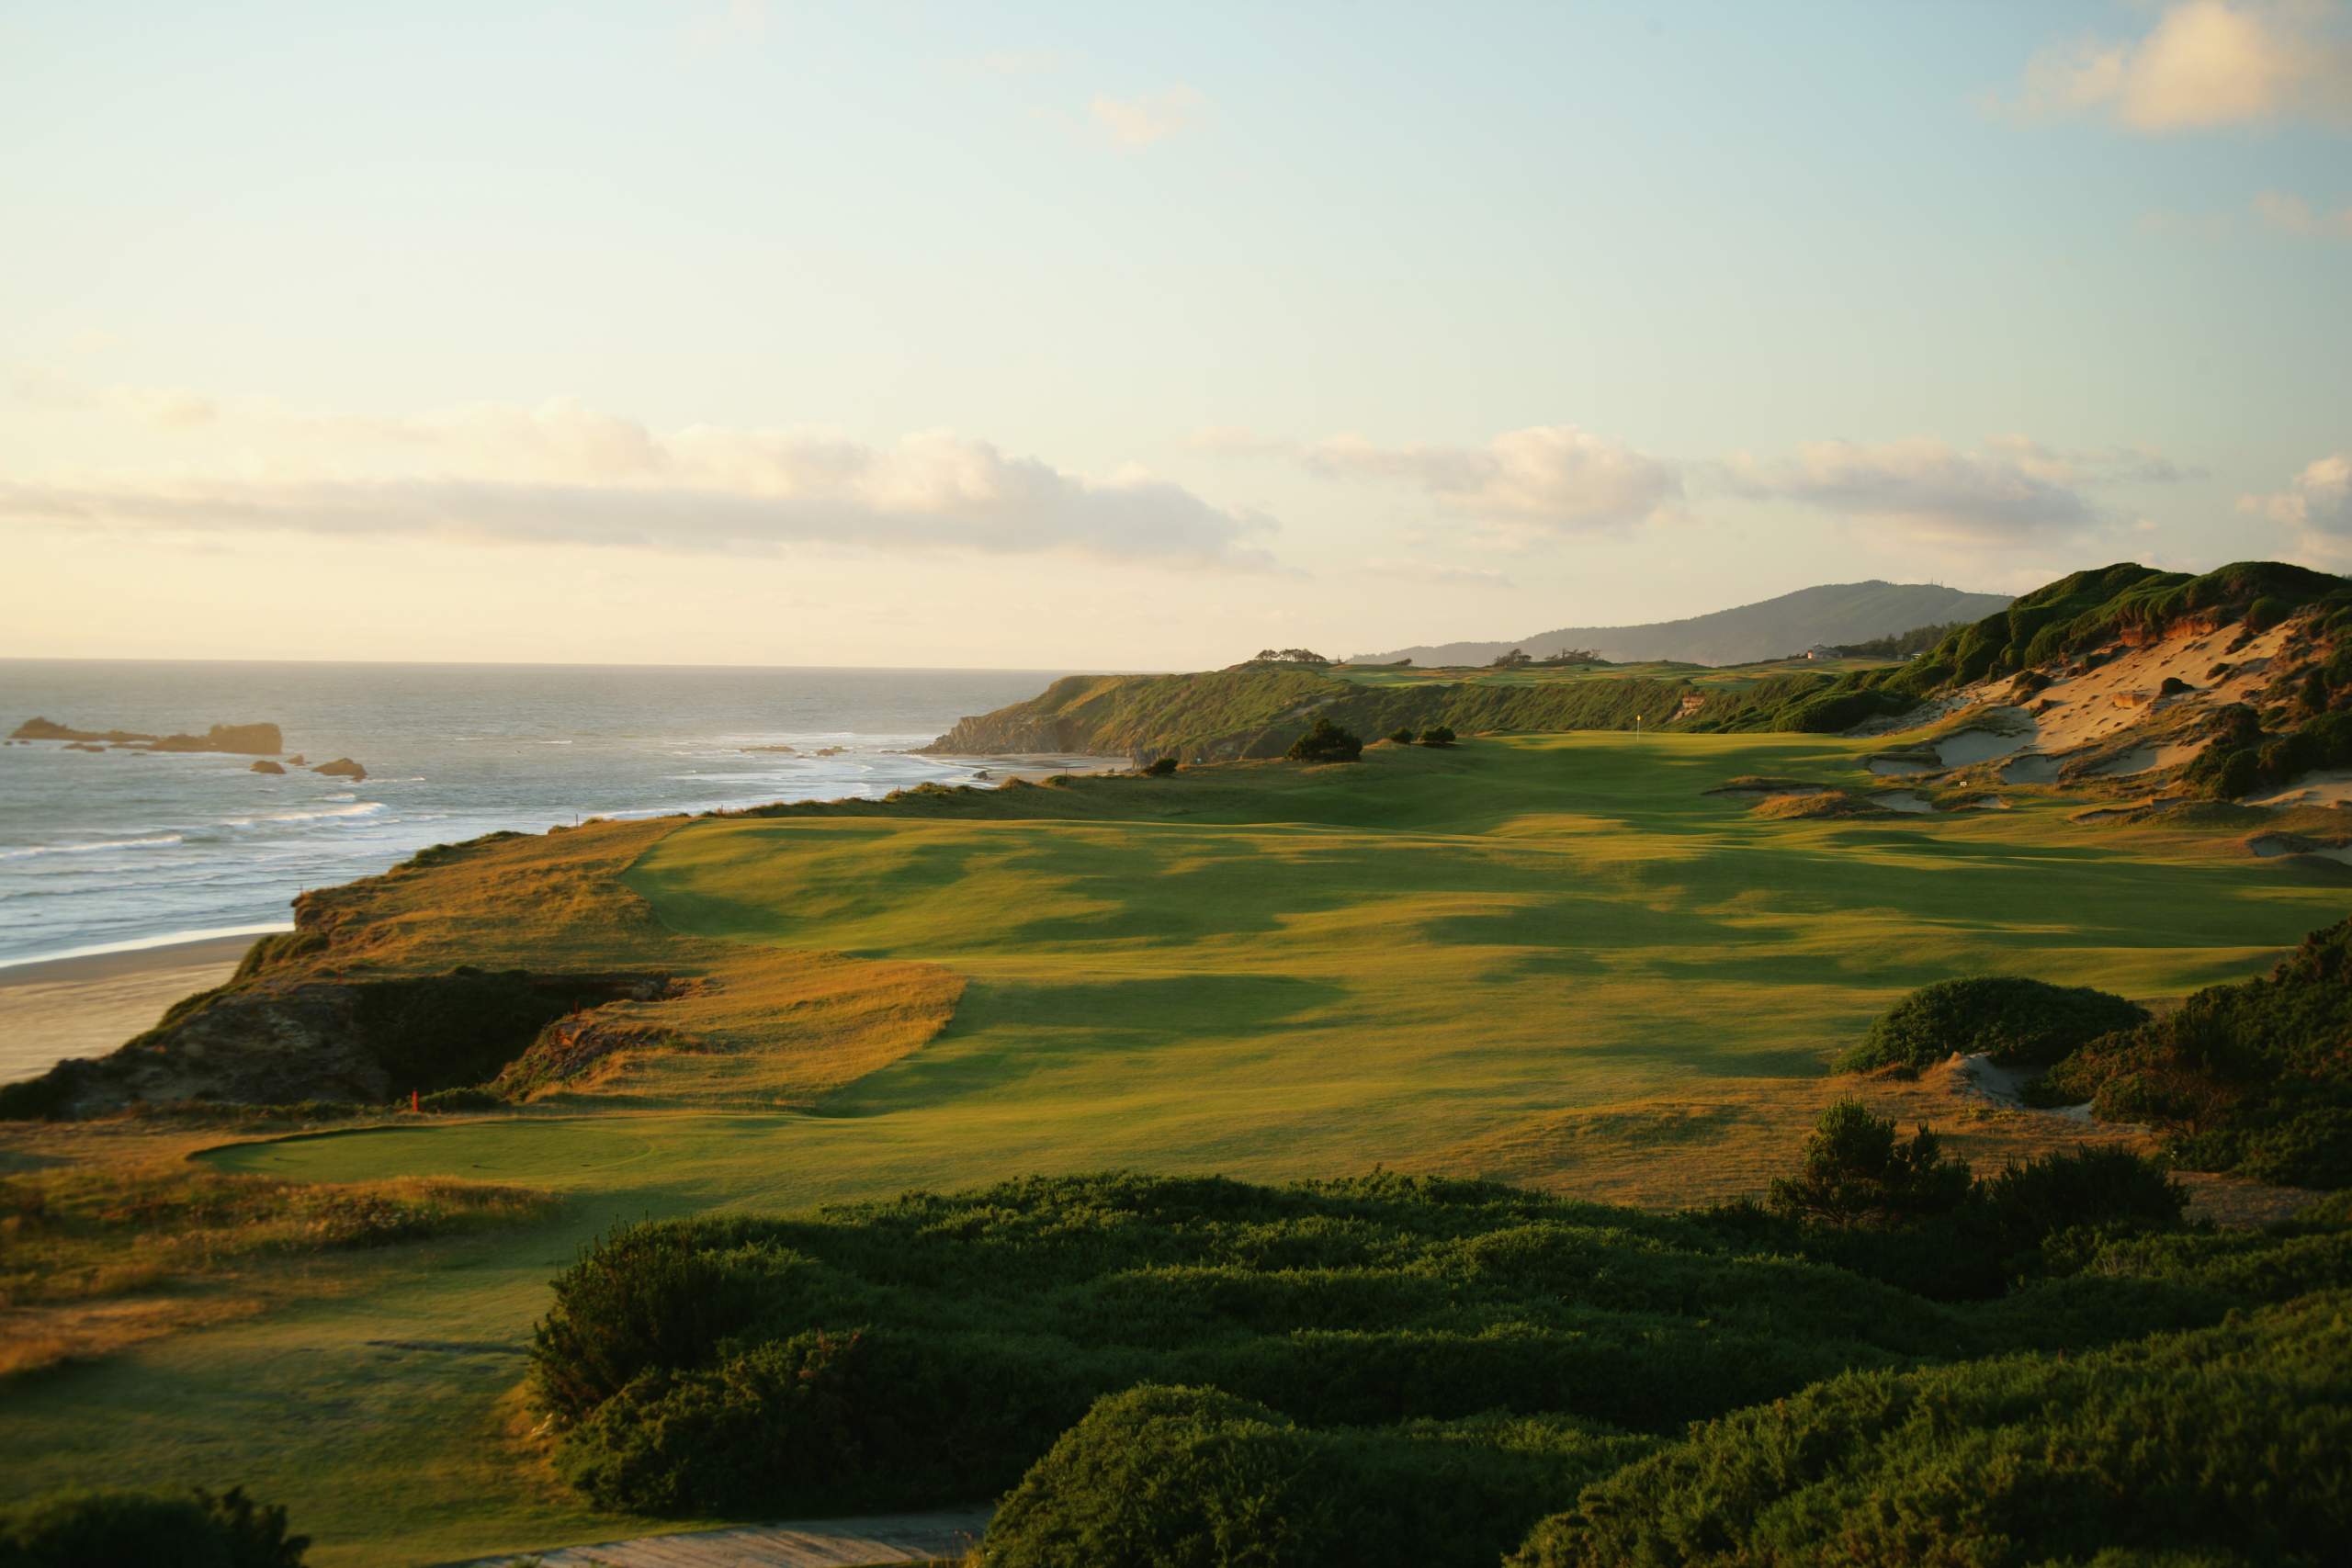 <em><b>Course Location: Bandon, Oregon</b></em> Crafted under the meticulous eye of renowned architect Tom Doak and unveiled in 2001, Pacific Dunes stands as a testament to the raw beauty of nature. Unlike its counterparts, Pacific Dunes doesn't feel like it was built as much as it was discovered. Its undulating fairways and untouched bunkers seamlessly blend into the coastal landscape, evoking a sense of timeless charm. The course emerges from shore pines to spectacular 60-foot sand dunes. The ever-present wind adds an element of challenge, demanding precision from every shot. Pacific Dunes is short enough to give you hope but rugged enough to test every facet of your game. You will be hard-pressed to find a more beautiful golf course.